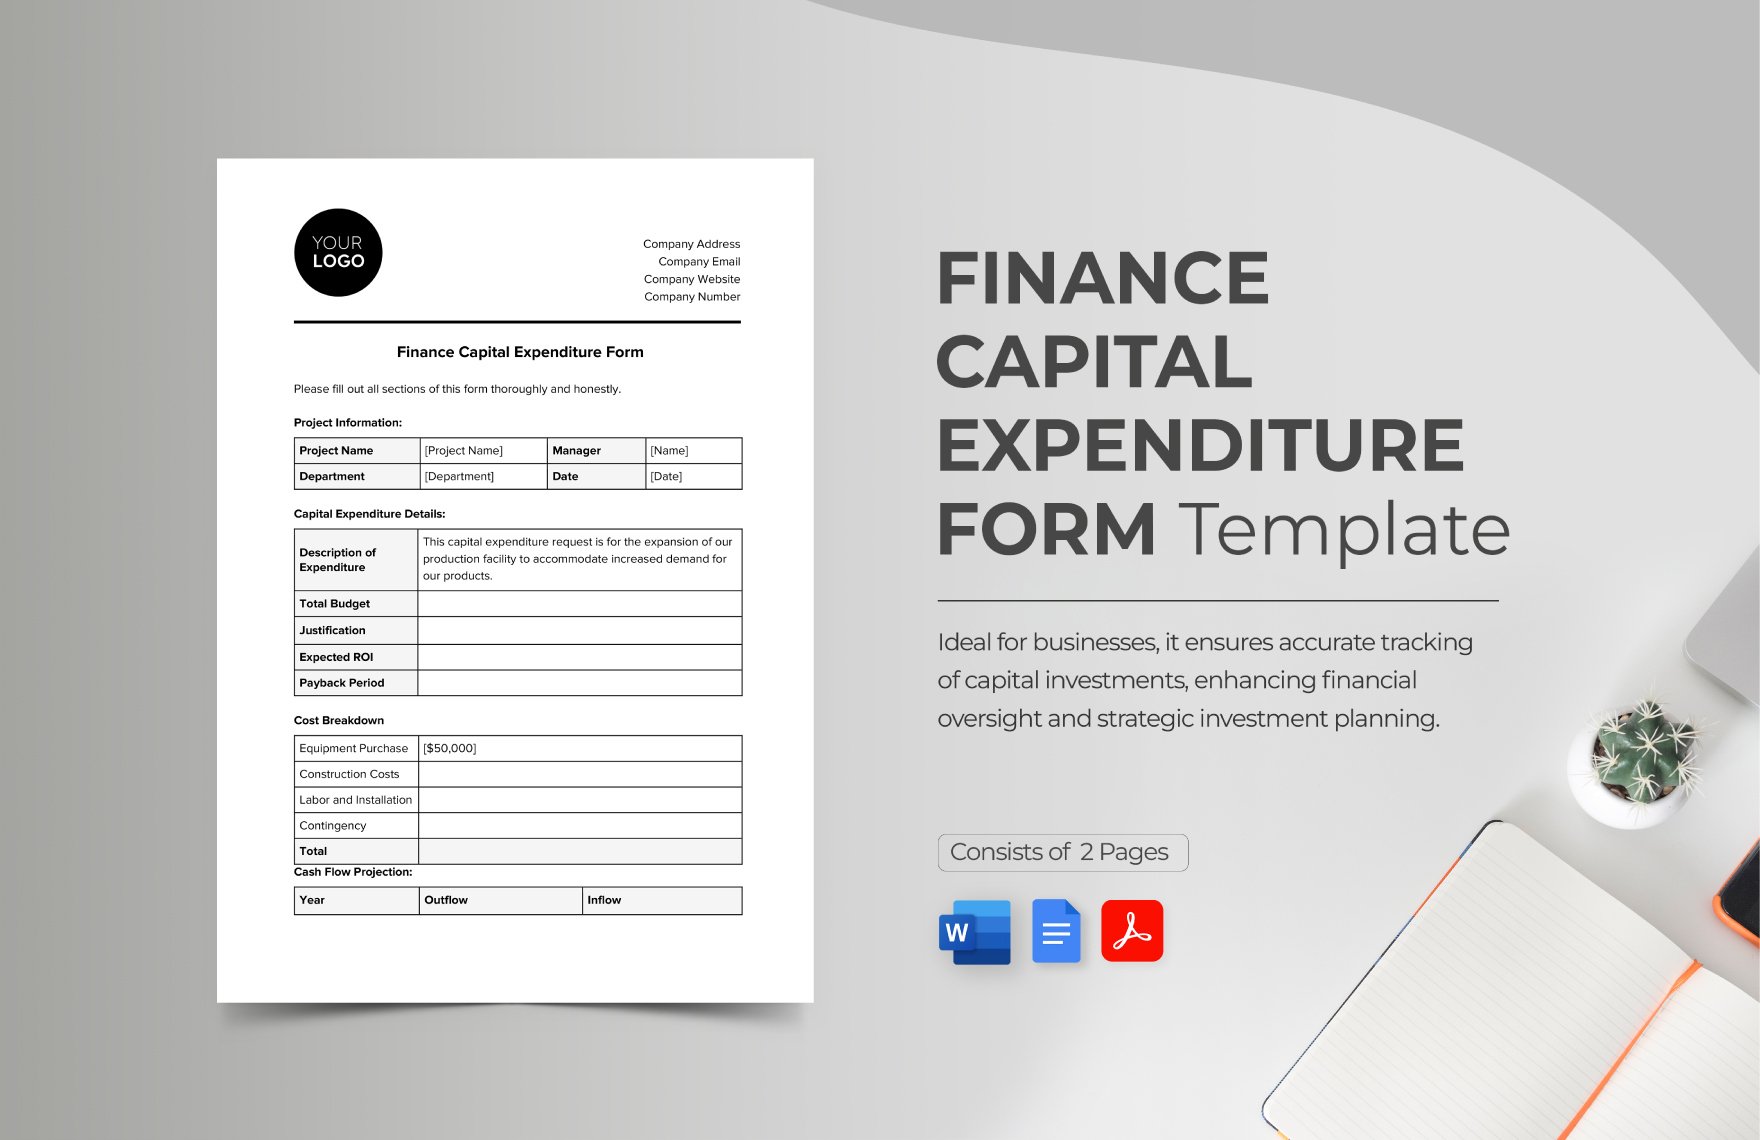 Finance Capital Expenditure Form Template